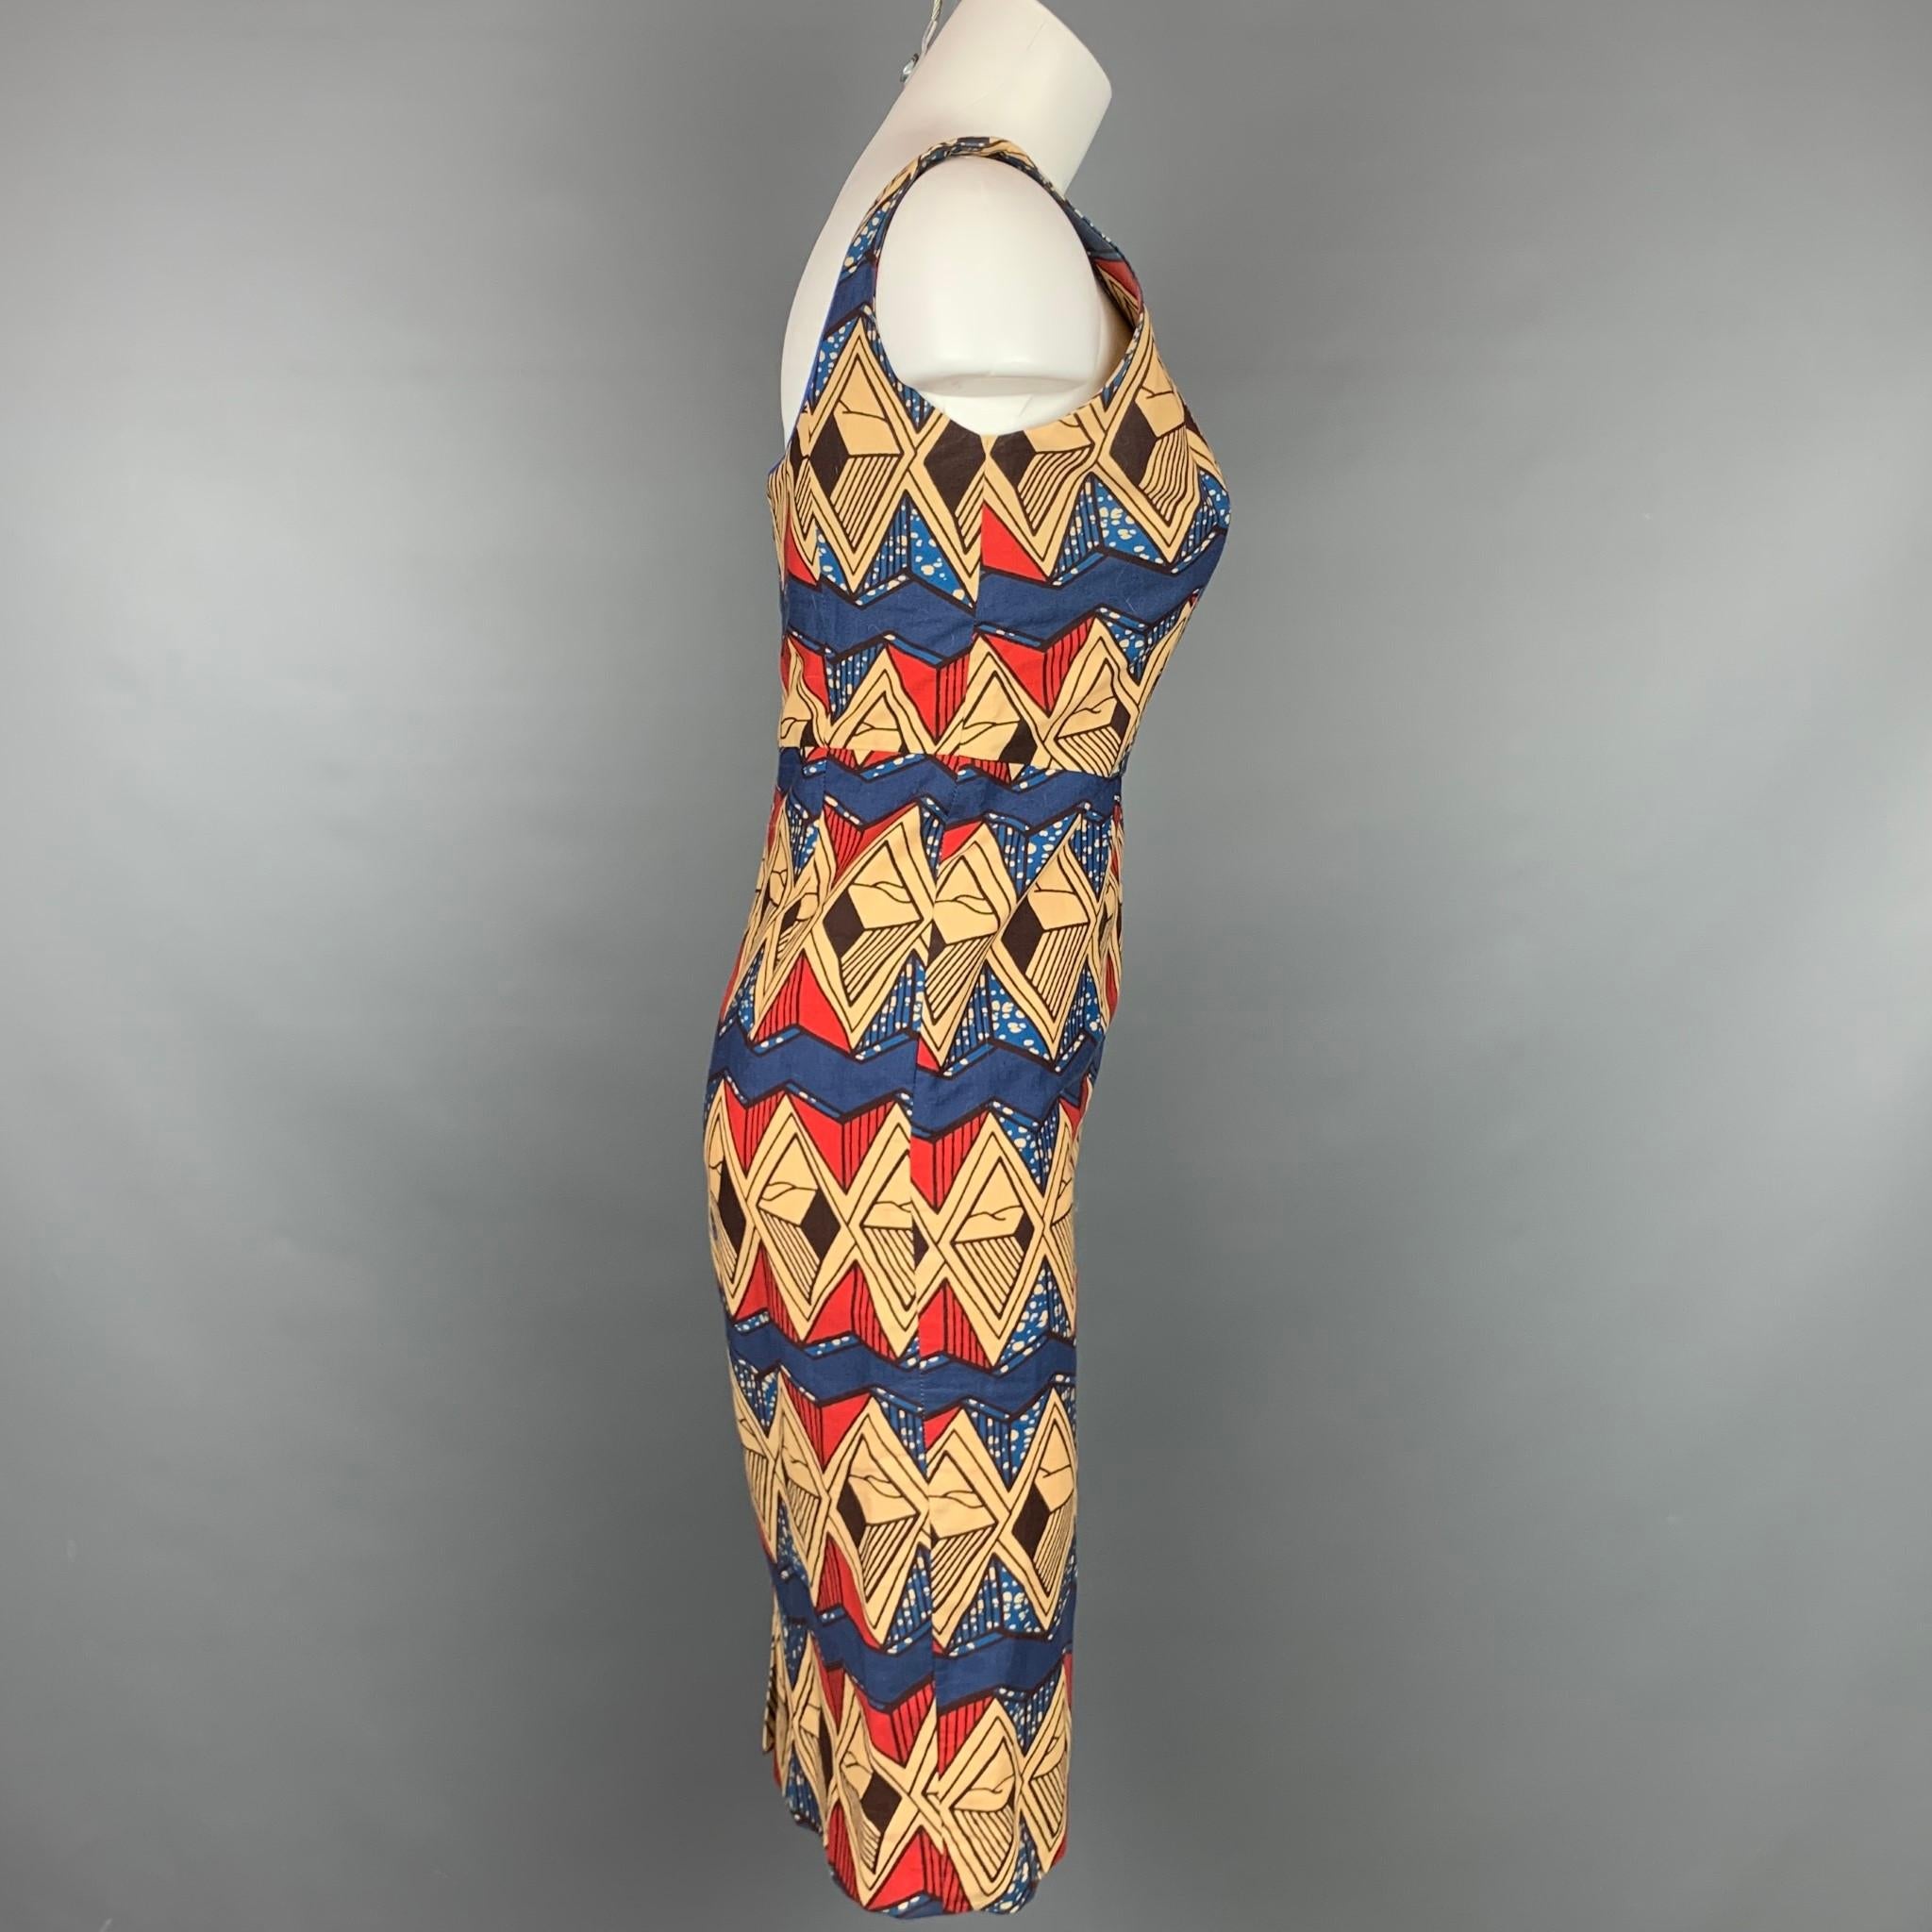 STELLA JEAN dress comes in a multi-color abstract print cotton featuring a a-line style, sleeveless, and a back zipper closure. Made in Italy.

Very Good Pre-Owned Condition.
Marked: IT 42
Original Retail Price: $890.00

Measurements:

Bust: 30